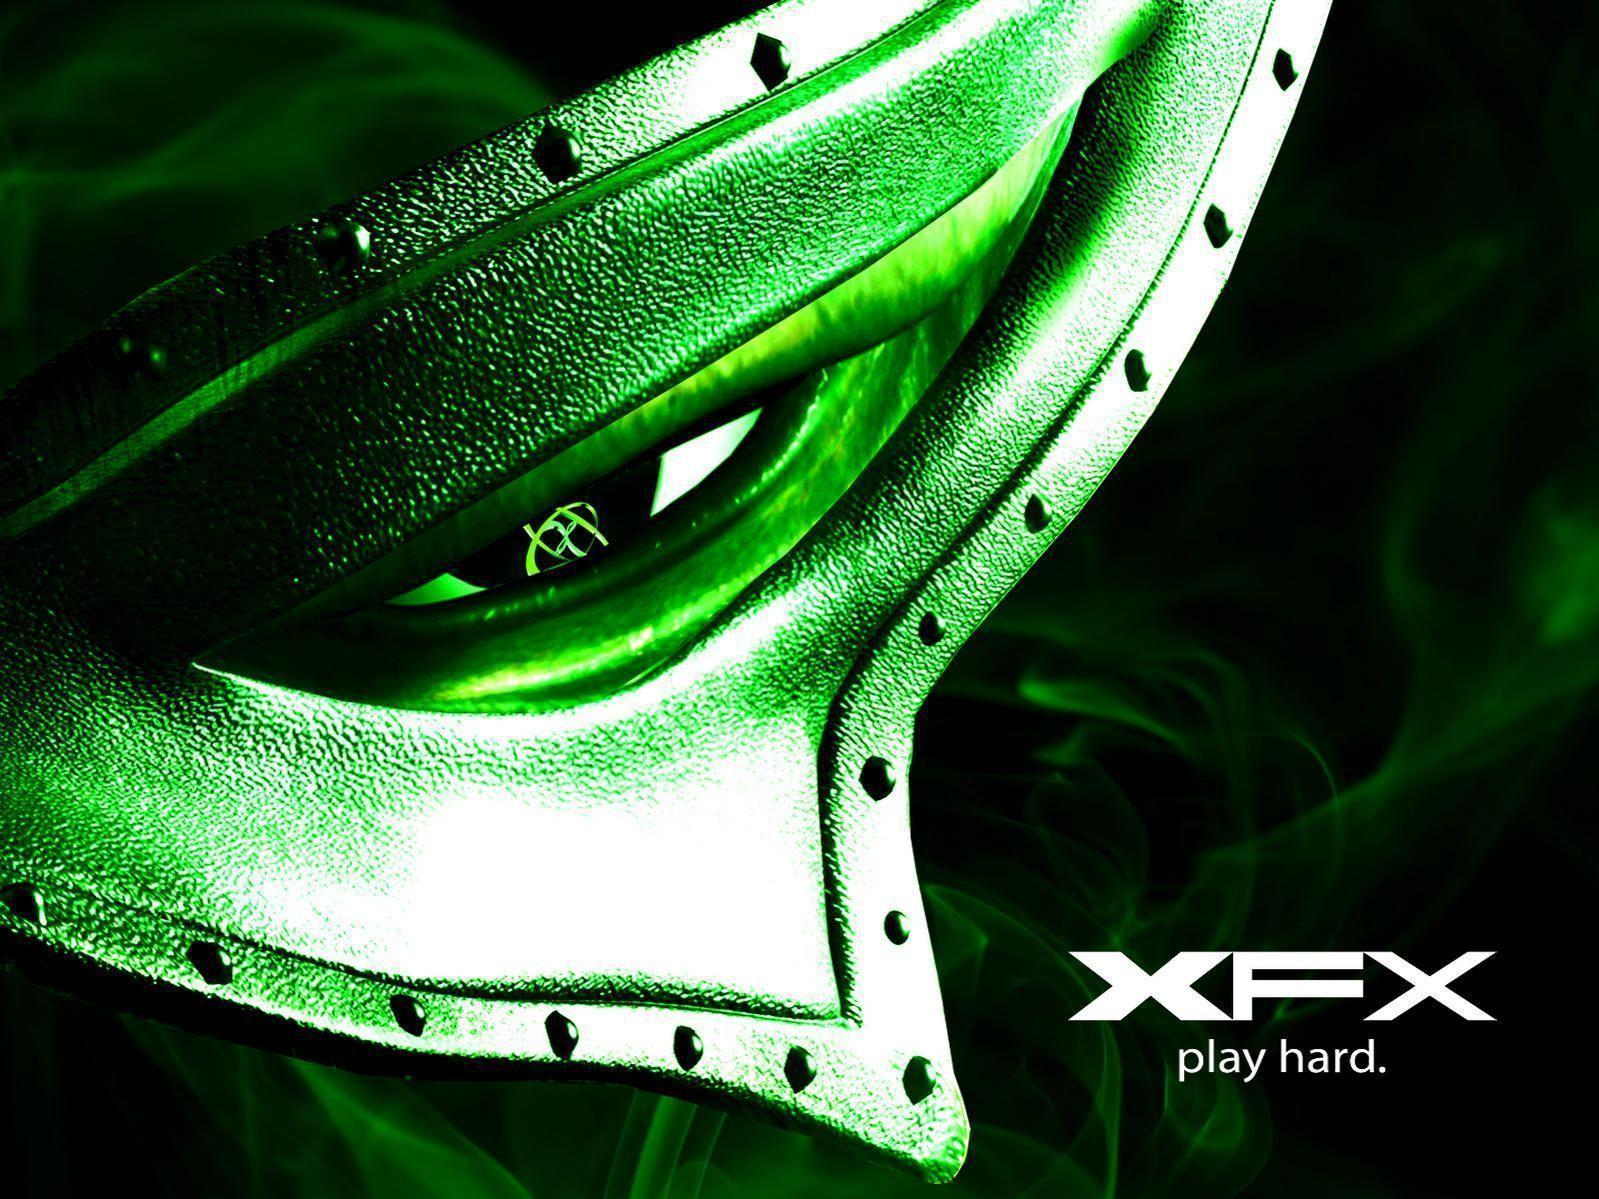 My XFX wallpaper submissions